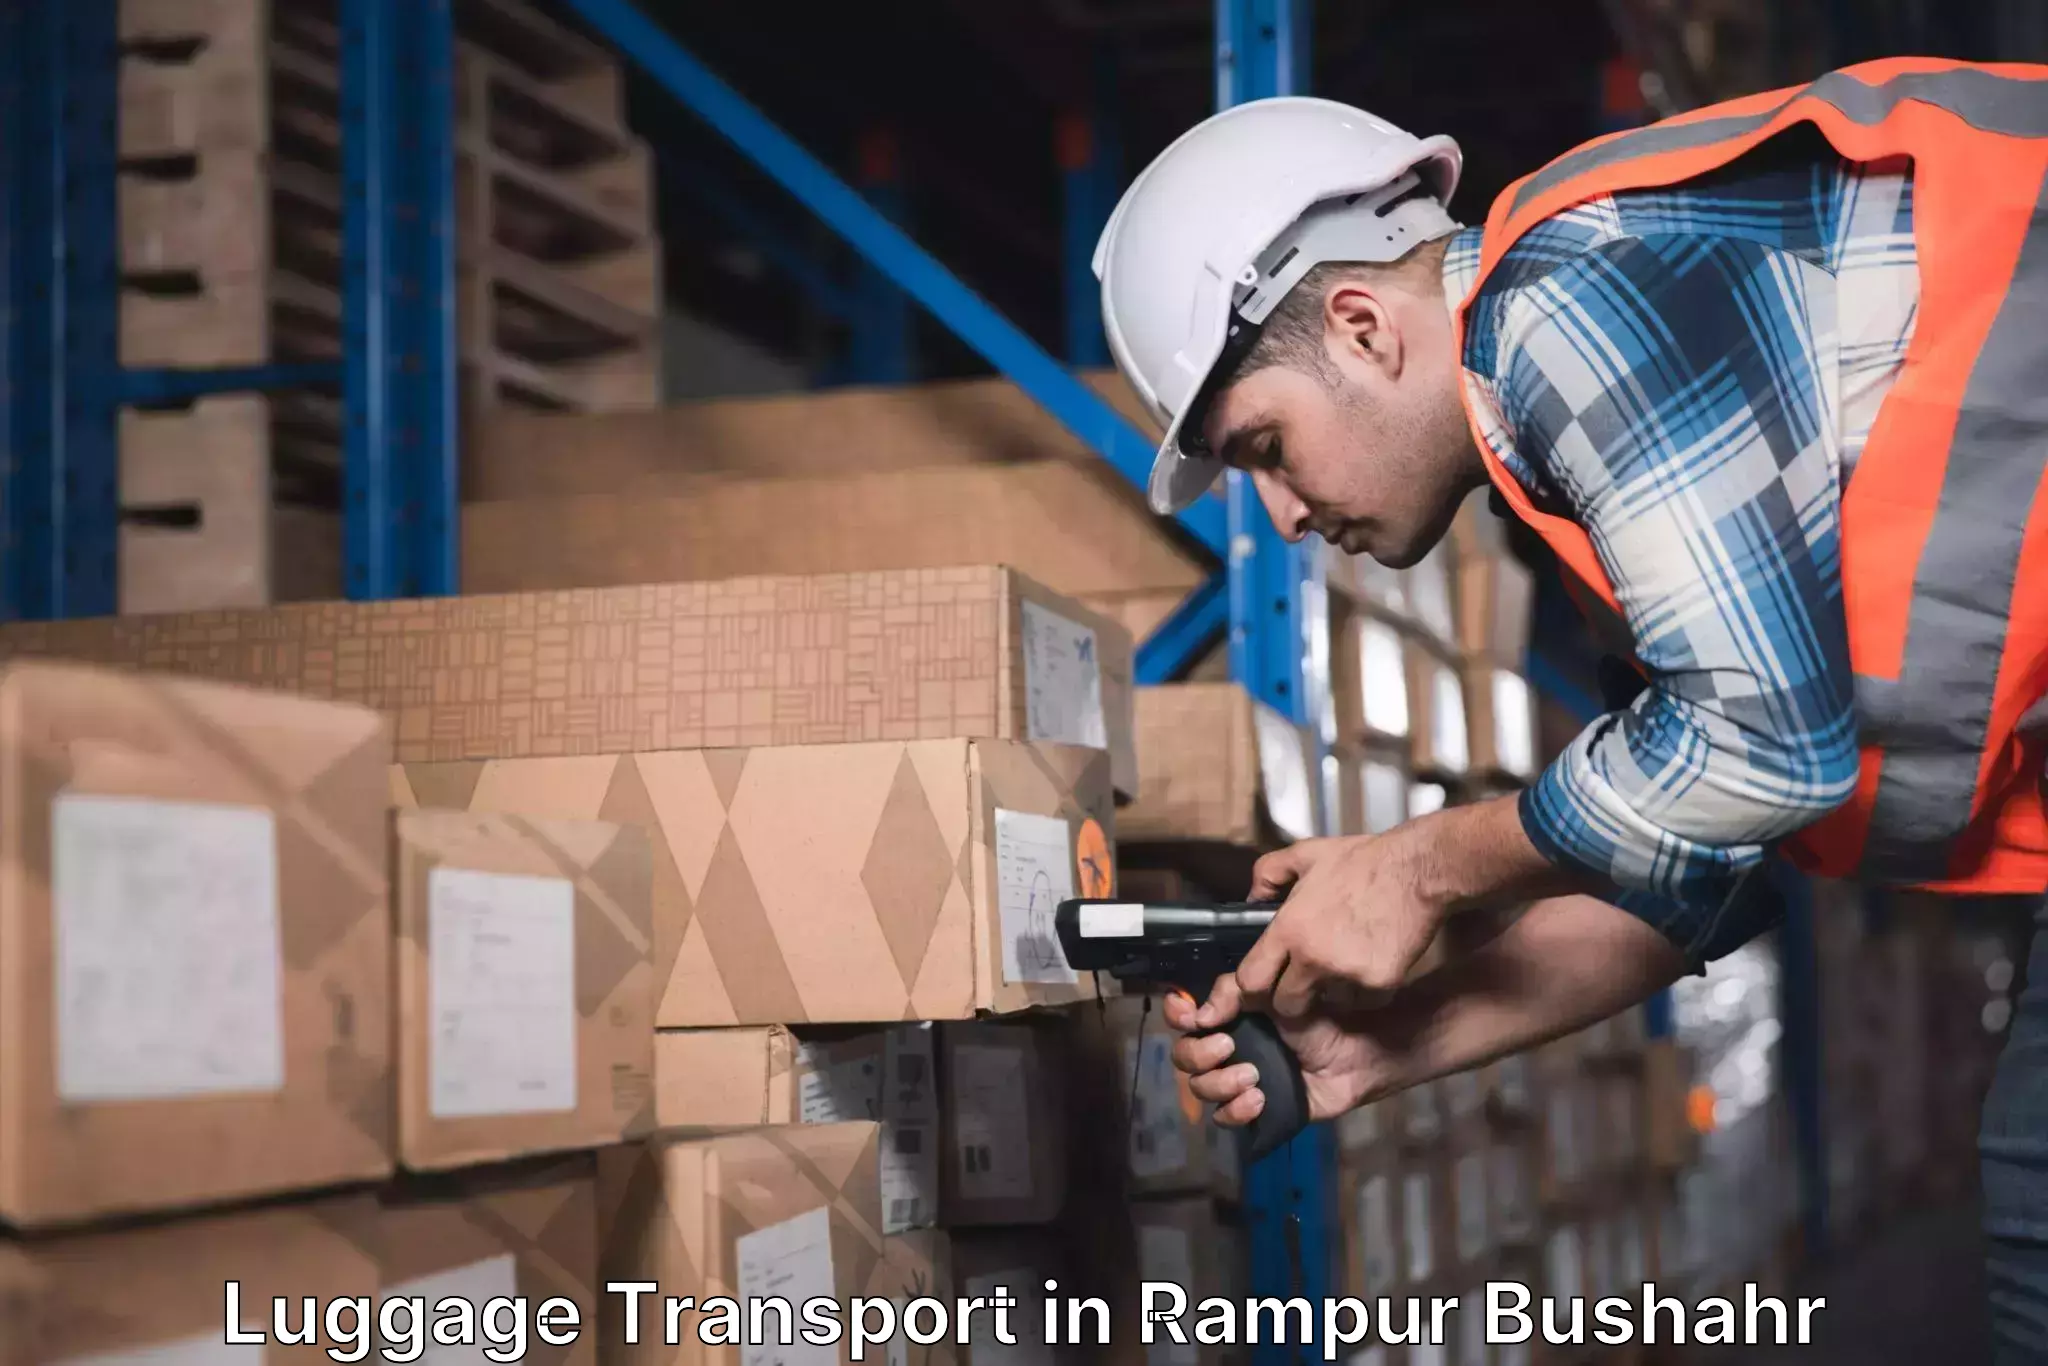 Luggage delivery system in Rampur Bushahr